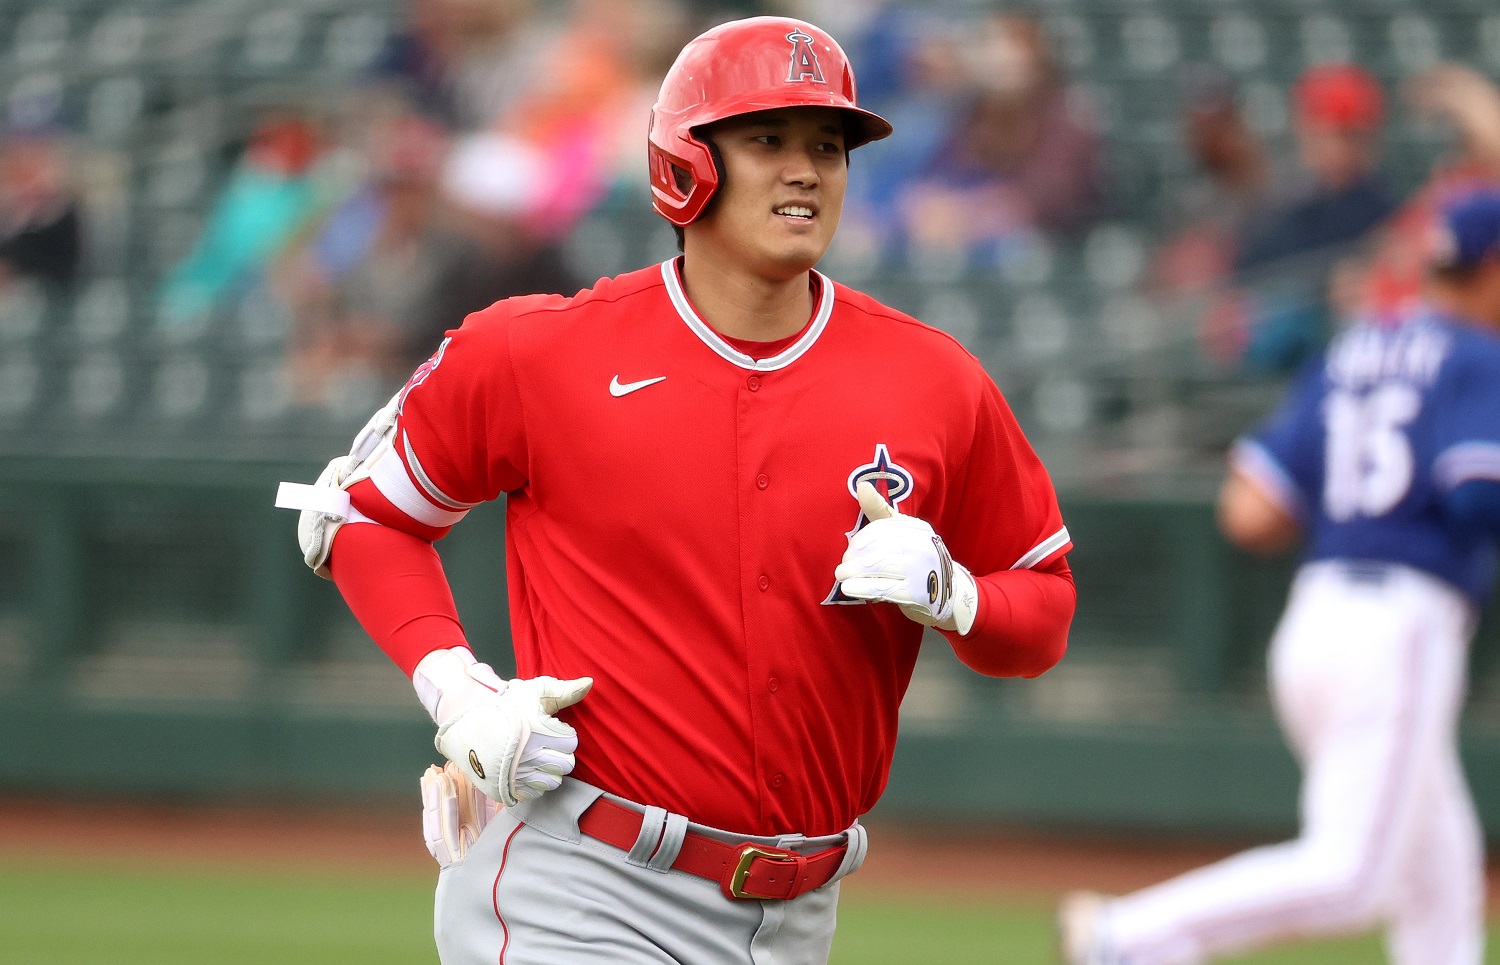 Shohei Ohtani had a strong spring training with the Los Angeles Angels after back-to-back serious injuries.